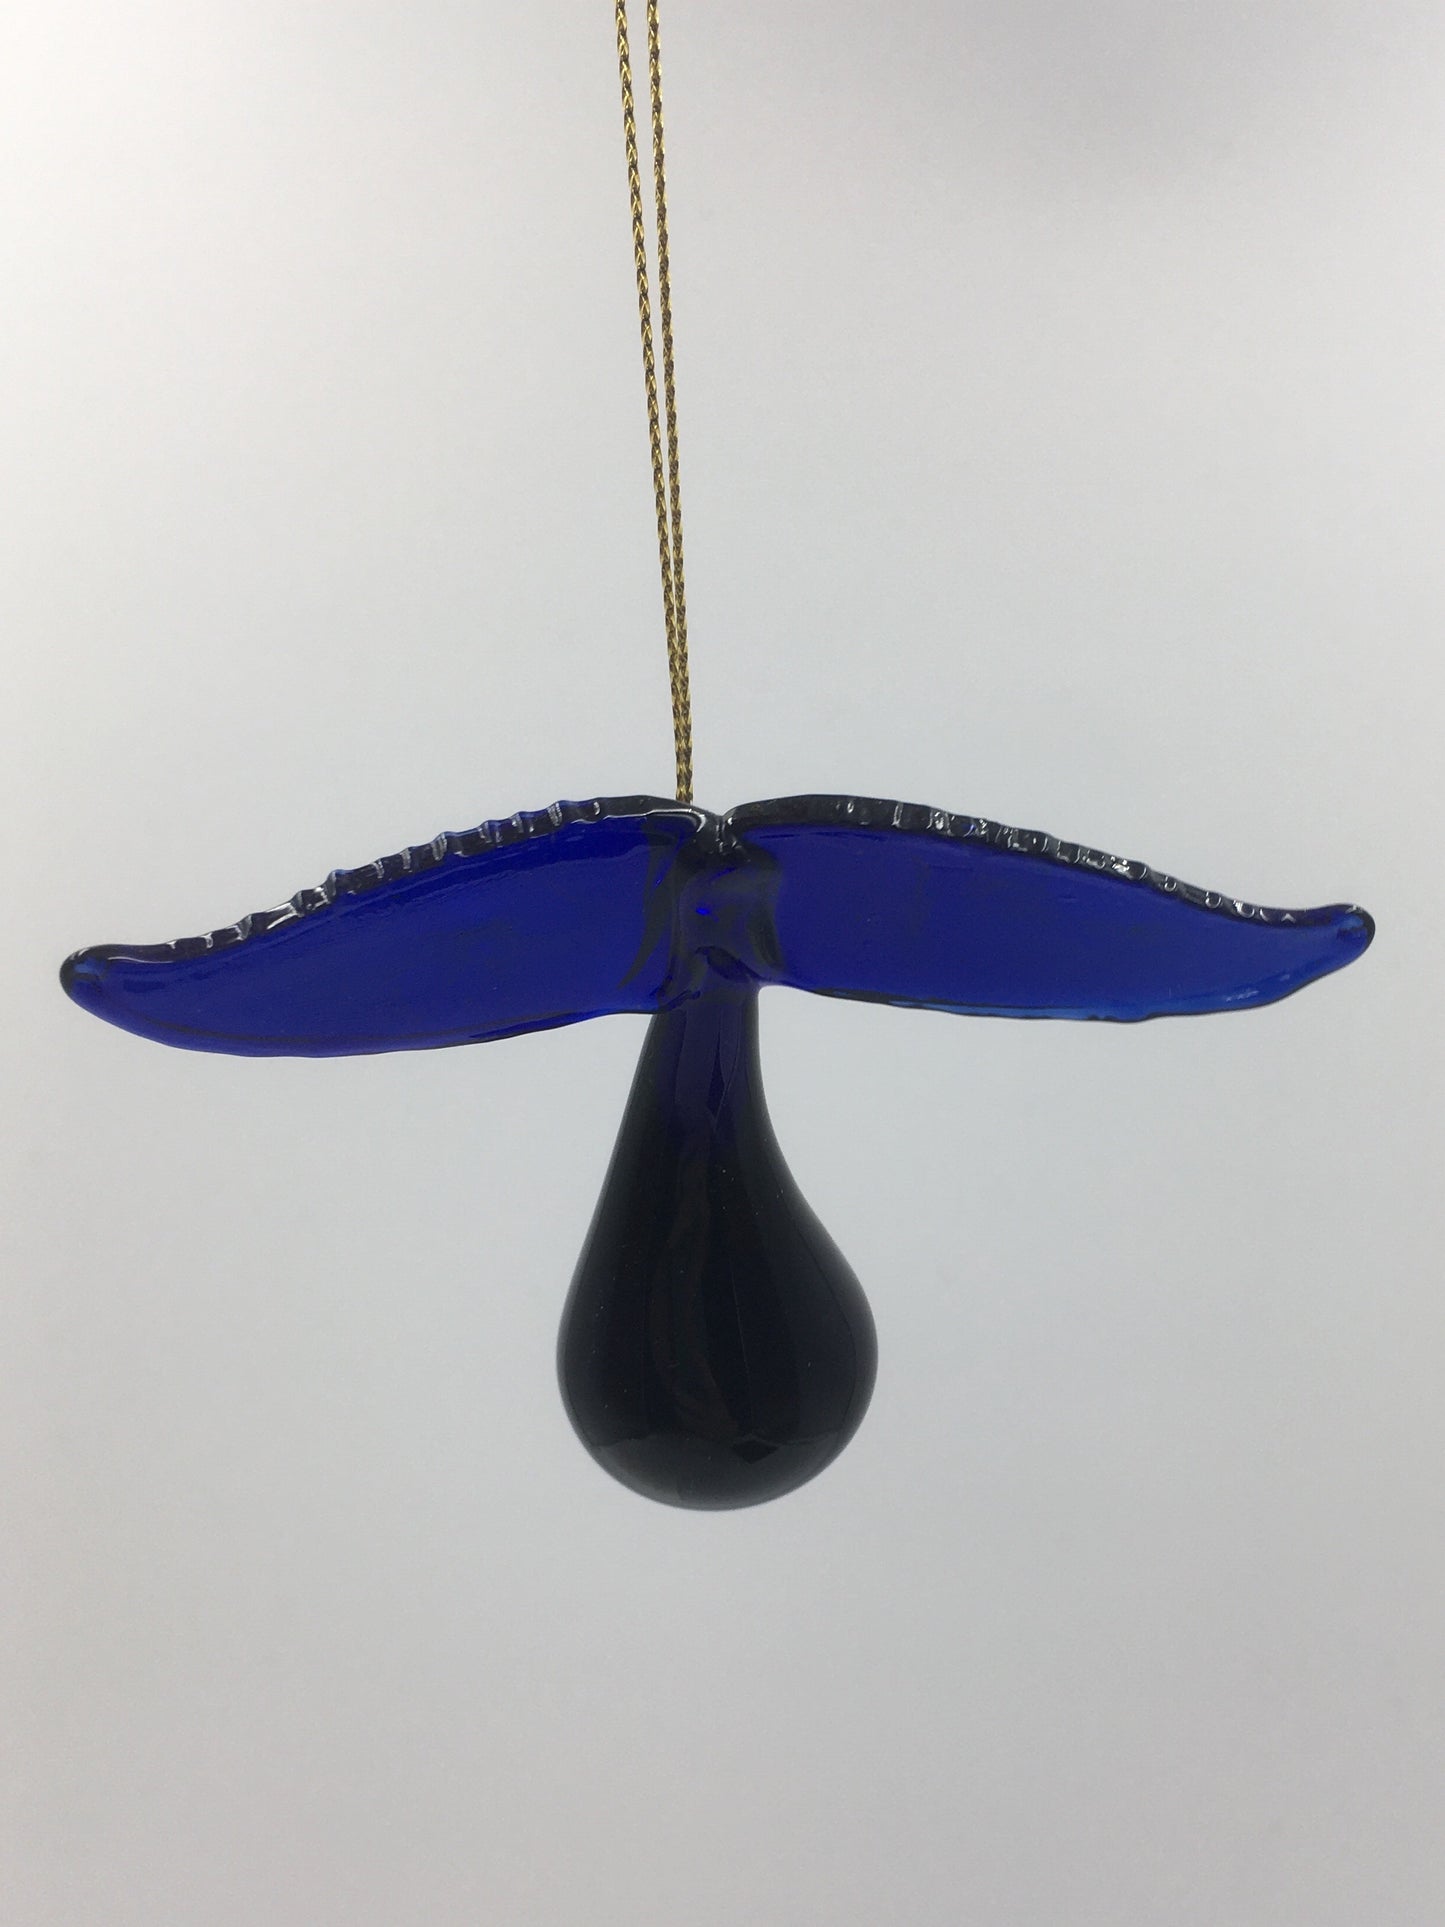 Whales Tail Egyptian Glass Ornament